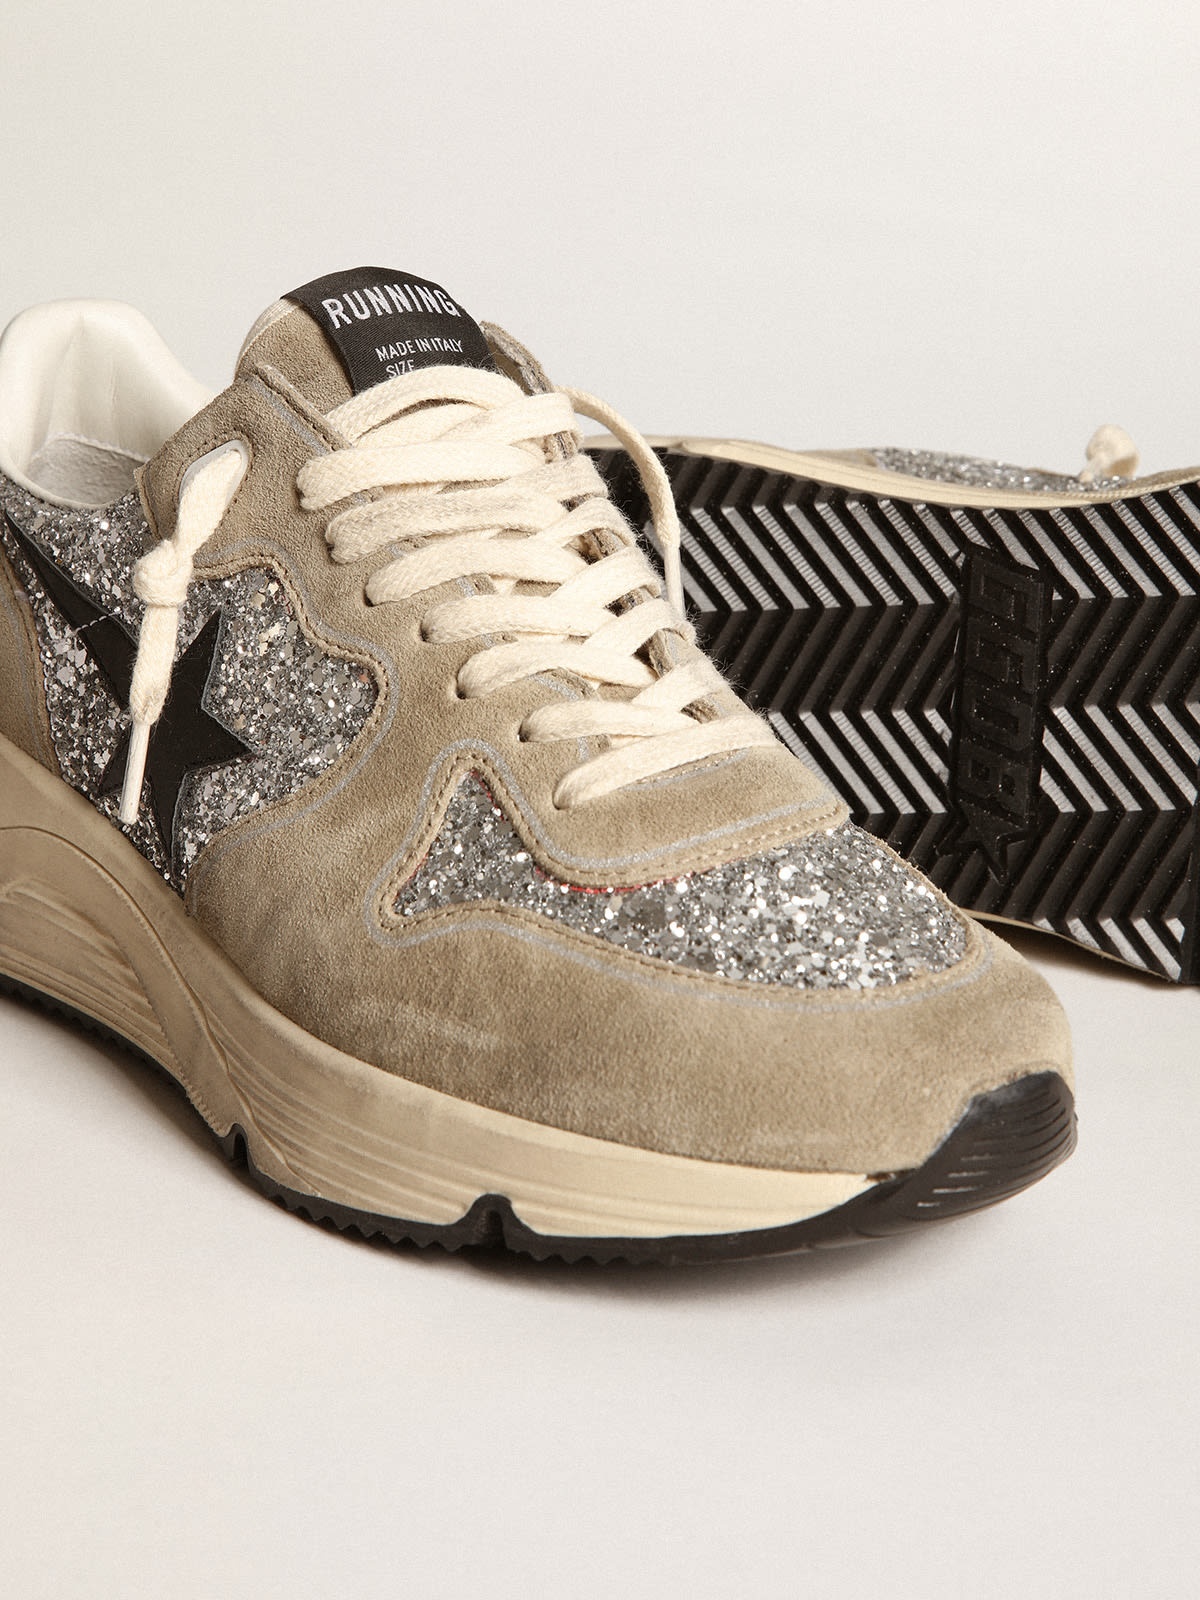 Golden Goose Running Sole sneakers in silver glitter and dove-gray suede  with black leather star | REVERSIBLE